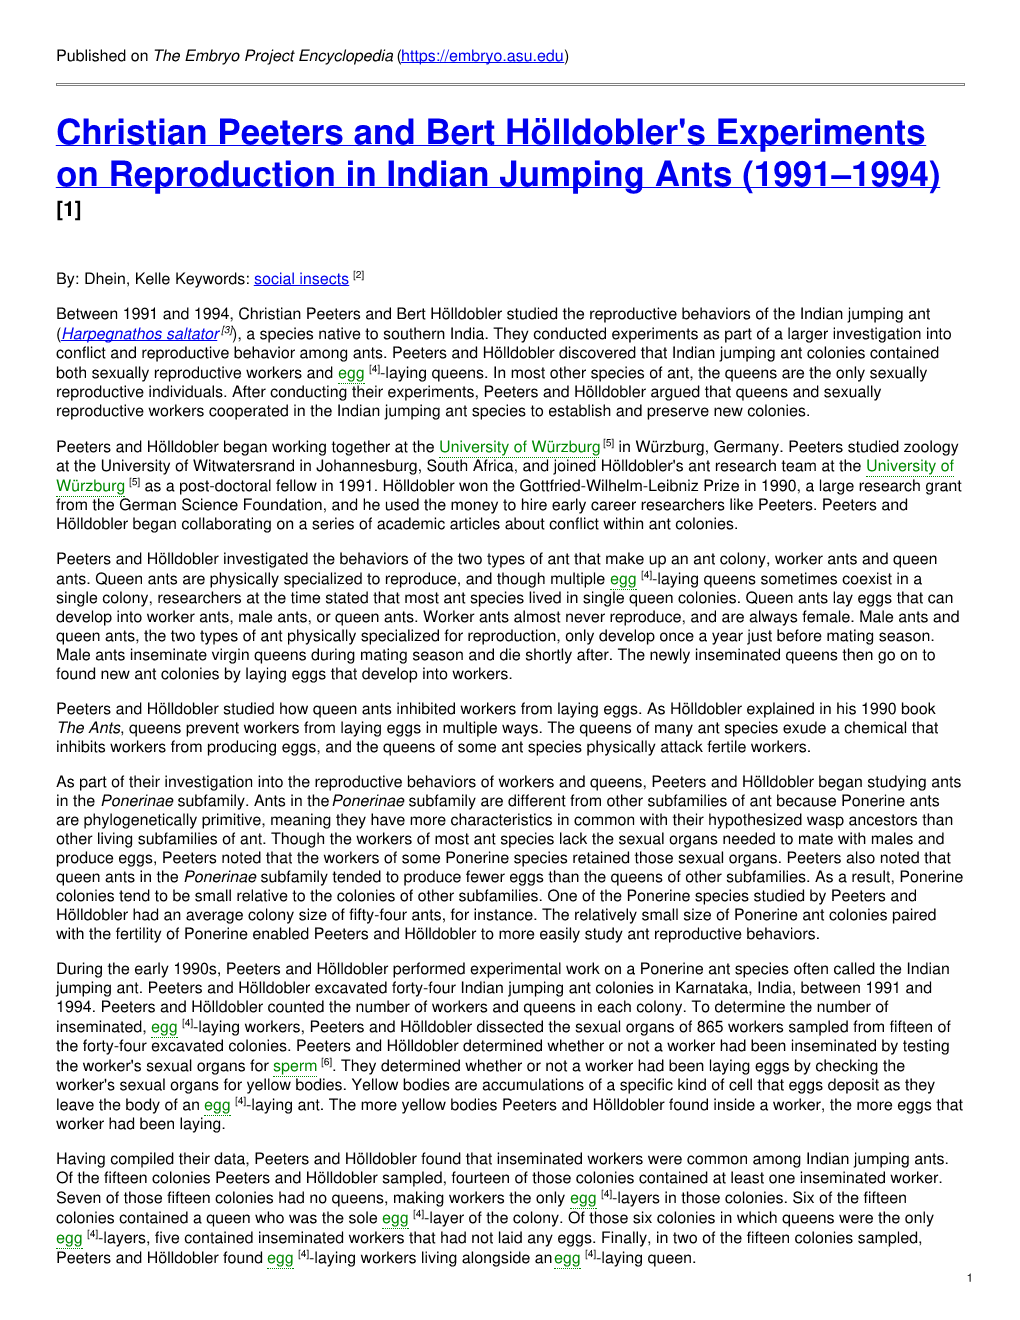 Christian Peeters and Bert Hölldobler's Experiments on Reproduction in Indian Jumping Ants (1991–1994) [1]